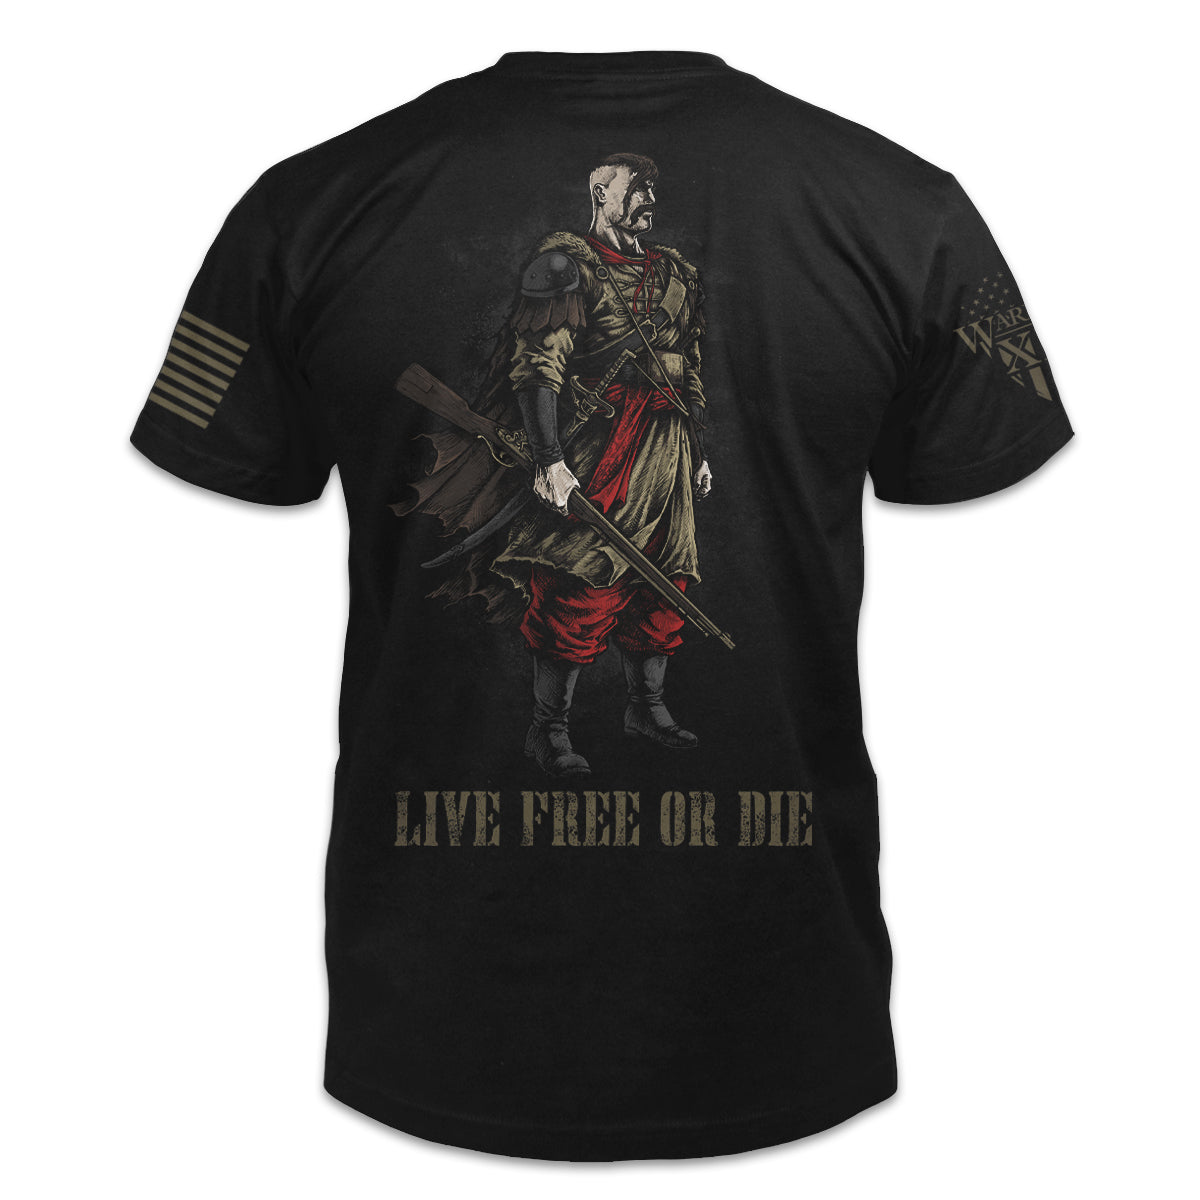 A black t-shirt with a cossack warrior with the words "live free or die" printed on the back of the shirt.